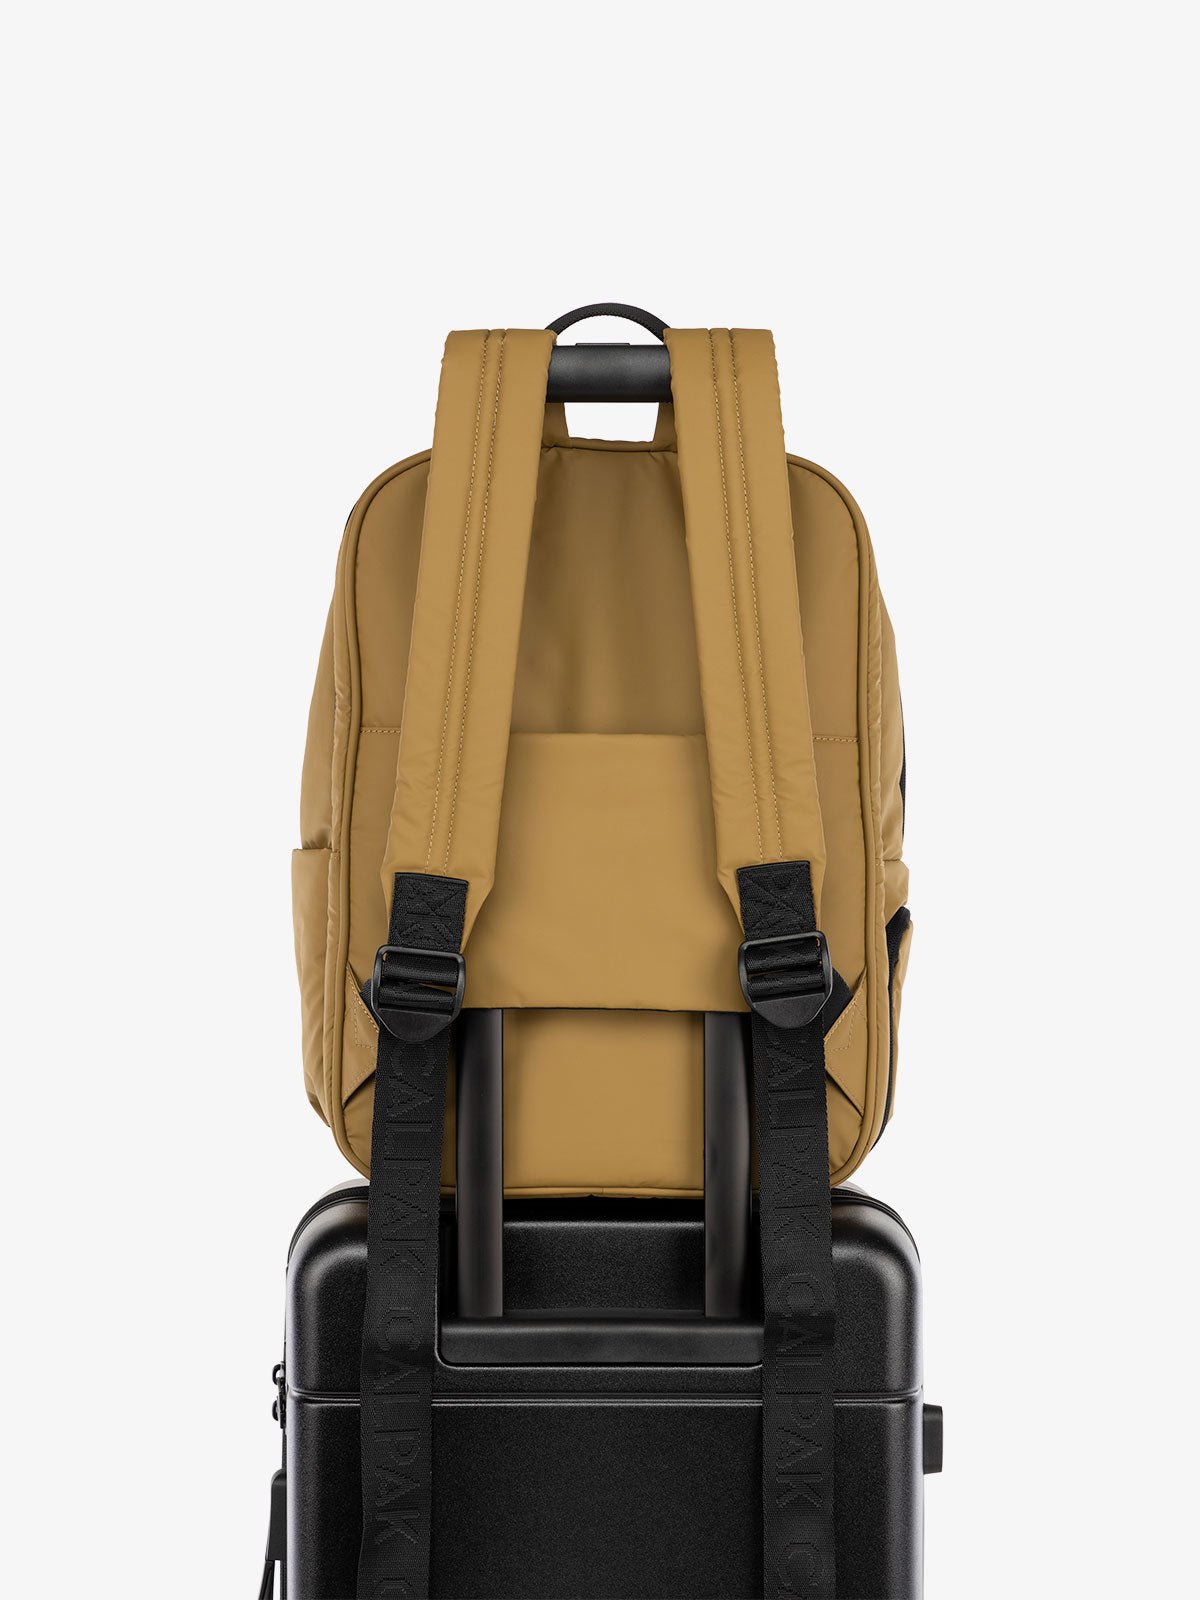 CALPAK water resistant Luka Laptop Backpack with adjustable shoulder straps and trolley sleeve in khaki